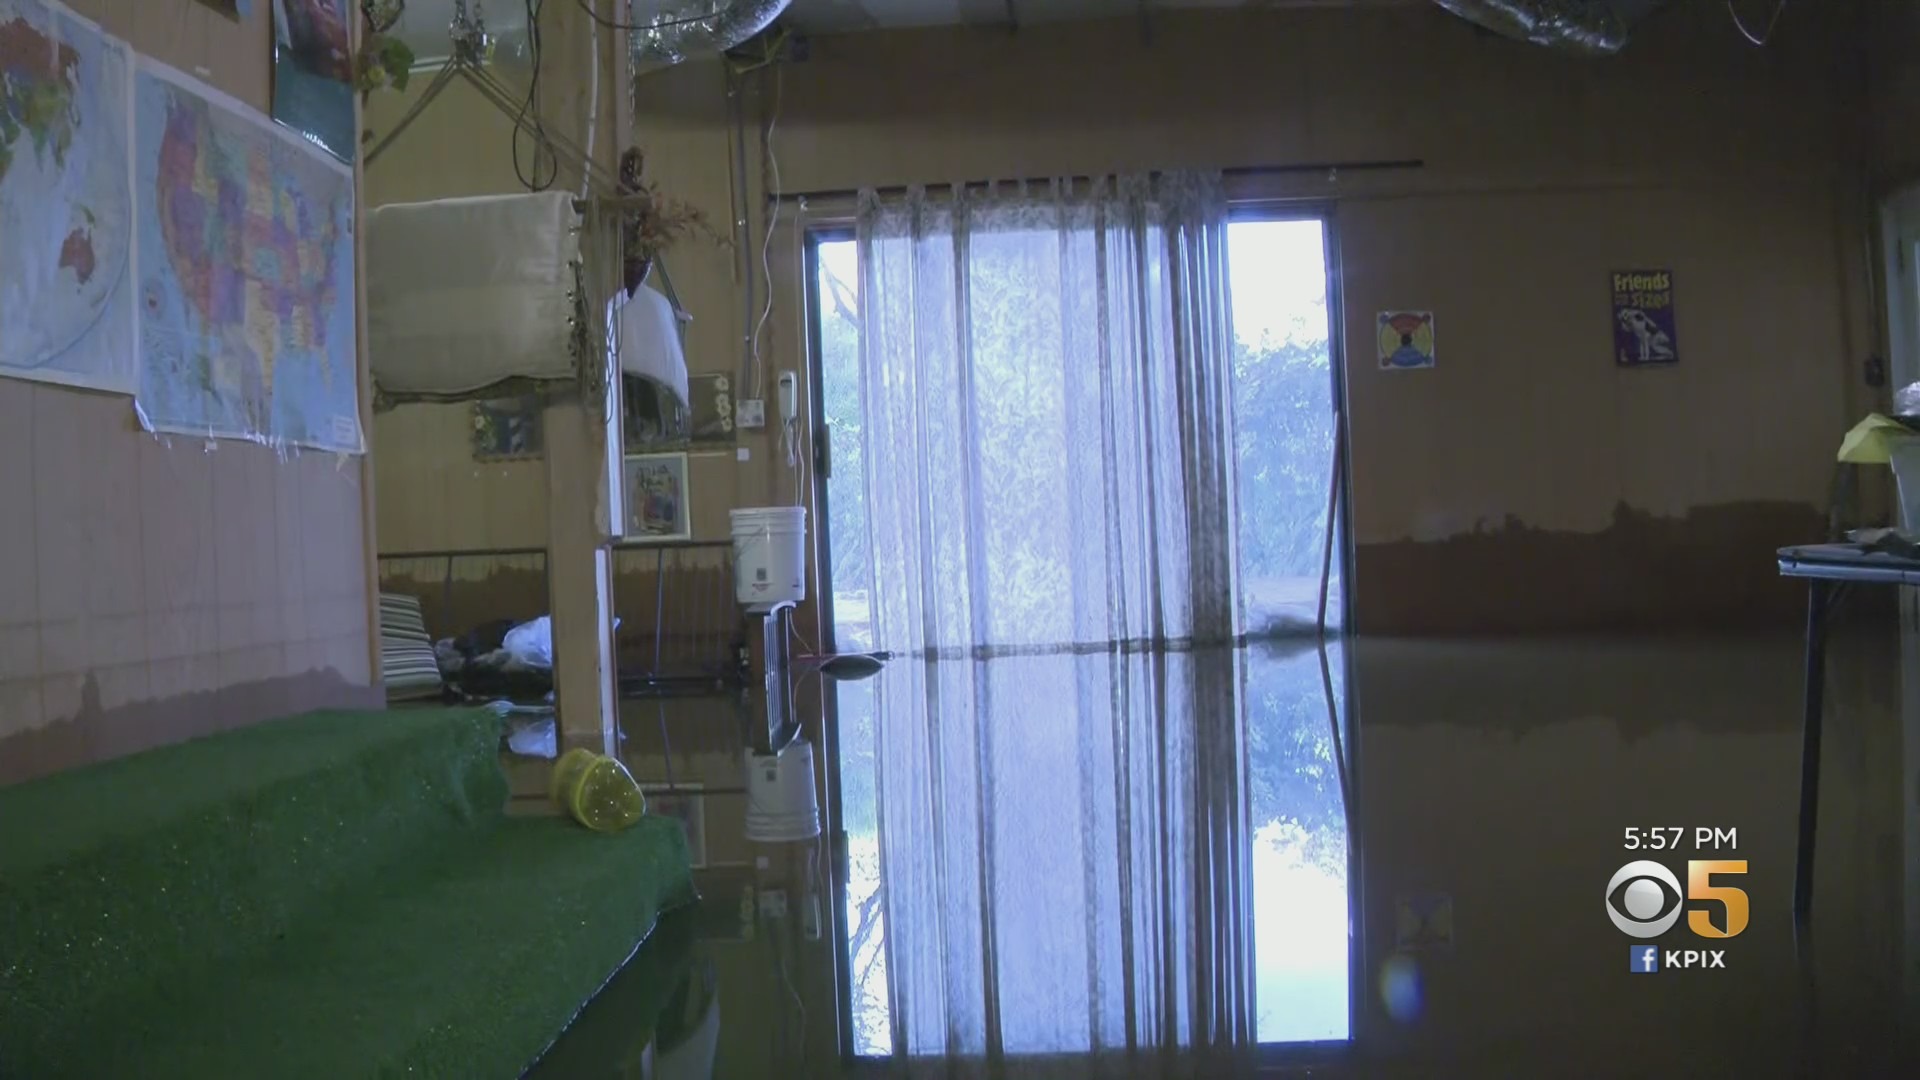 Flooding in the basement of Theresa Mendoza's home. The Oakland resident has blamed the repeated flooding on Caltrans not clearing debris in a culvert behind her home. (CBS)